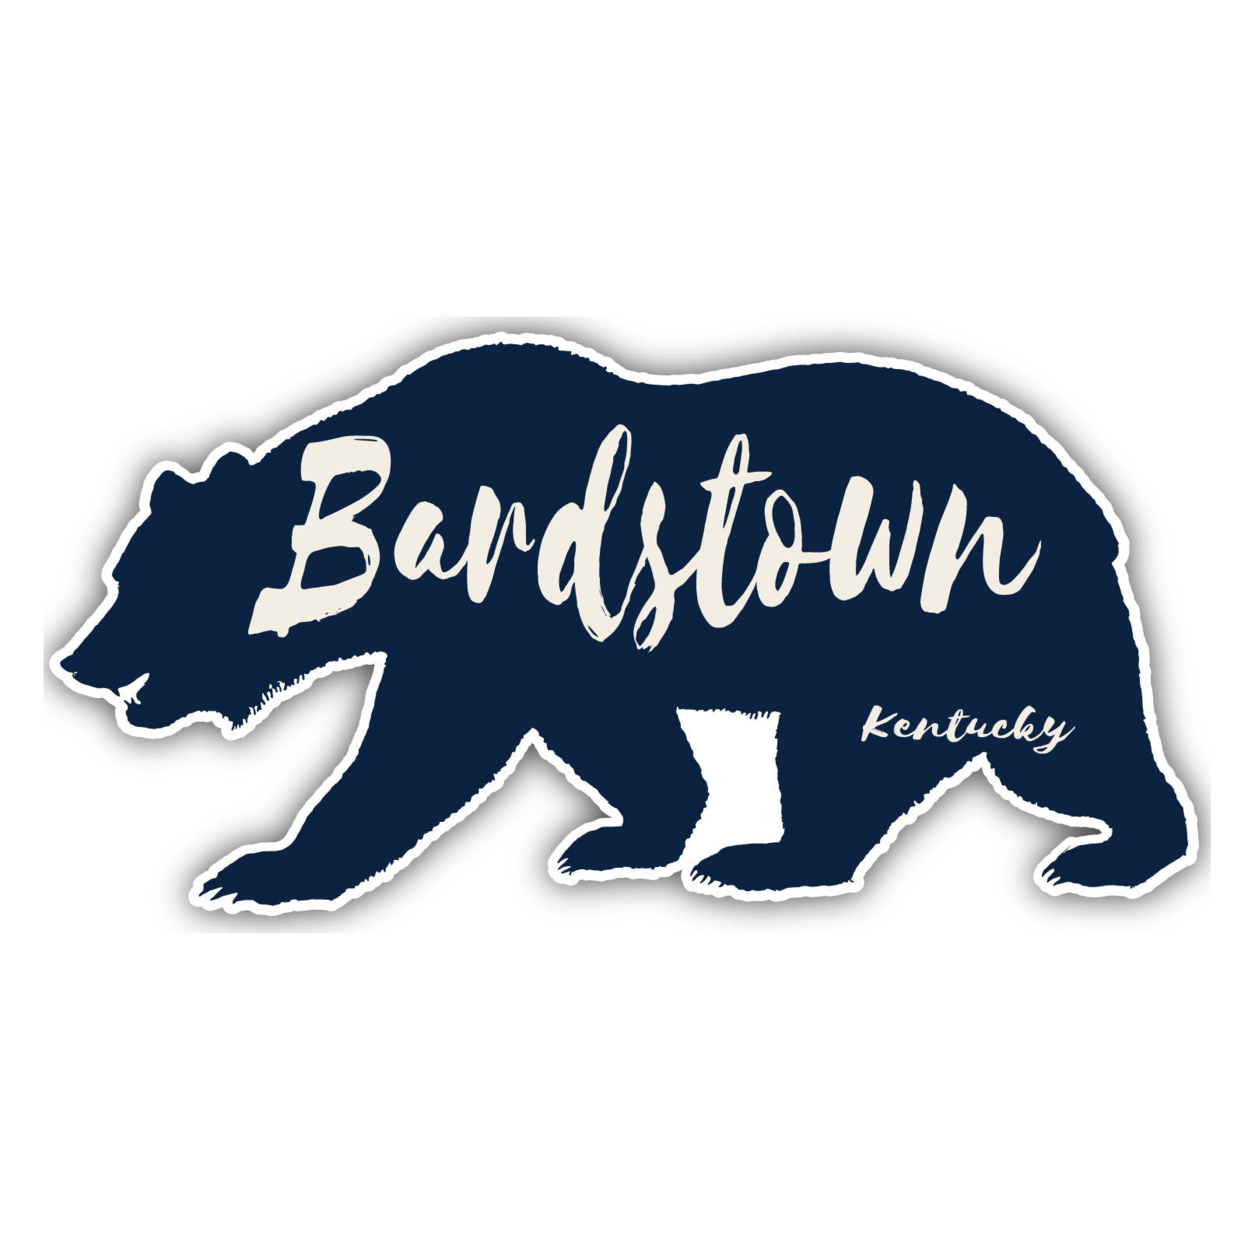 Bardstown Kentucky Souvenir Decorative Stickers (Choose Theme And Size) - Single Unit, 2-Inch, Great Outdoors